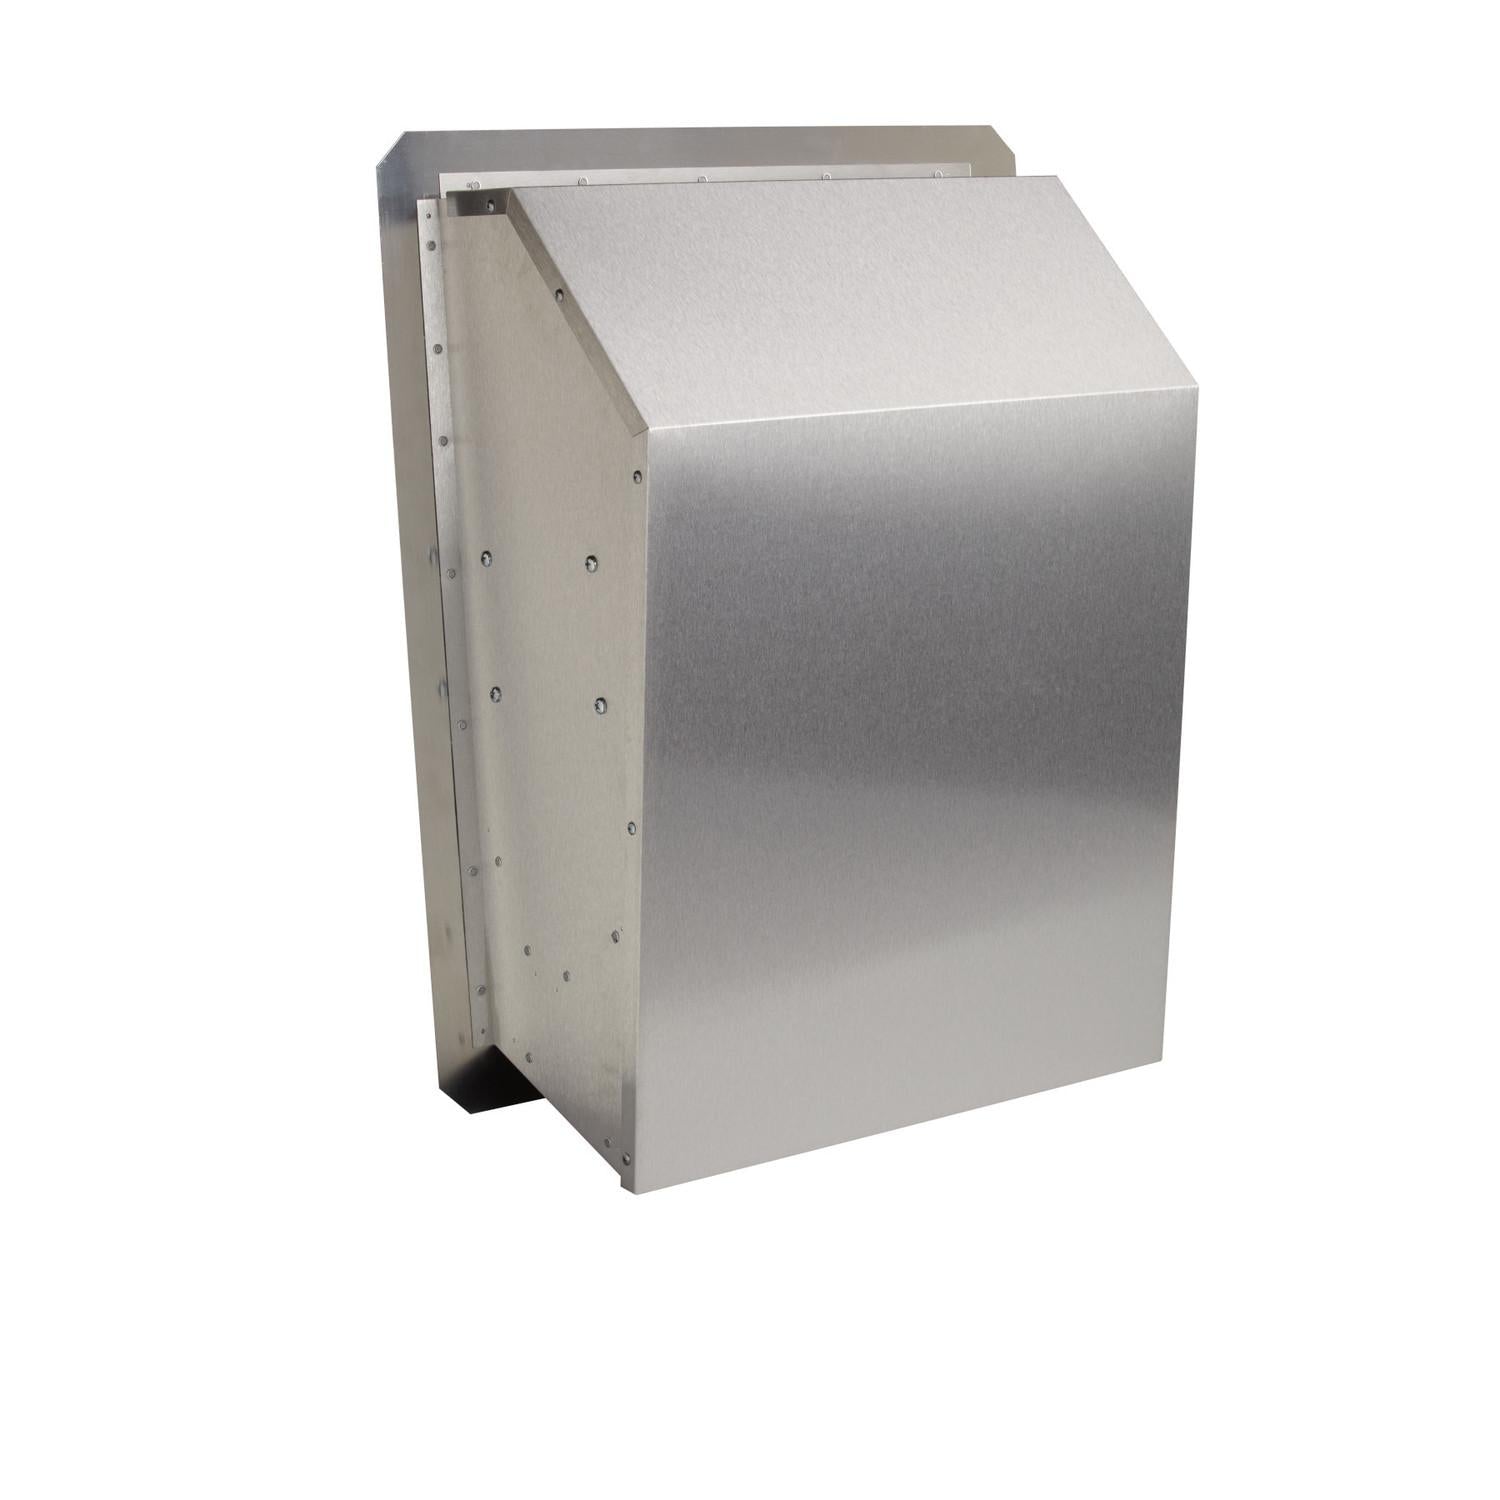 Broan 1620 Max External Blower CFM, for use with Select Broan® Range Hoods